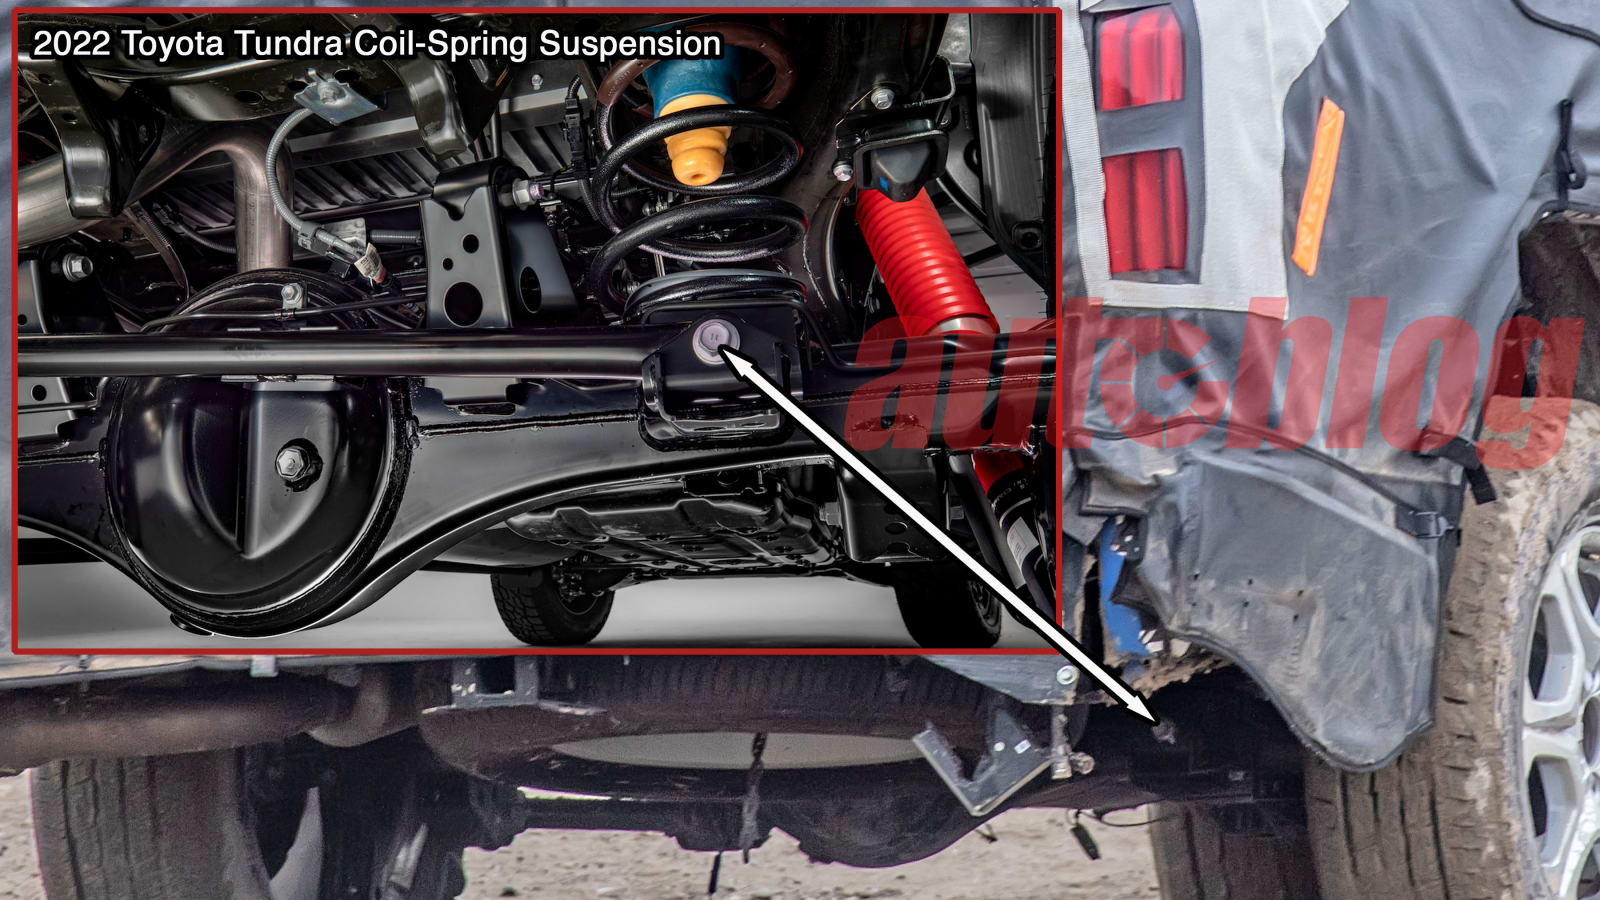 2024 Toyota Tacoma seems to have a rear coil spring suspension